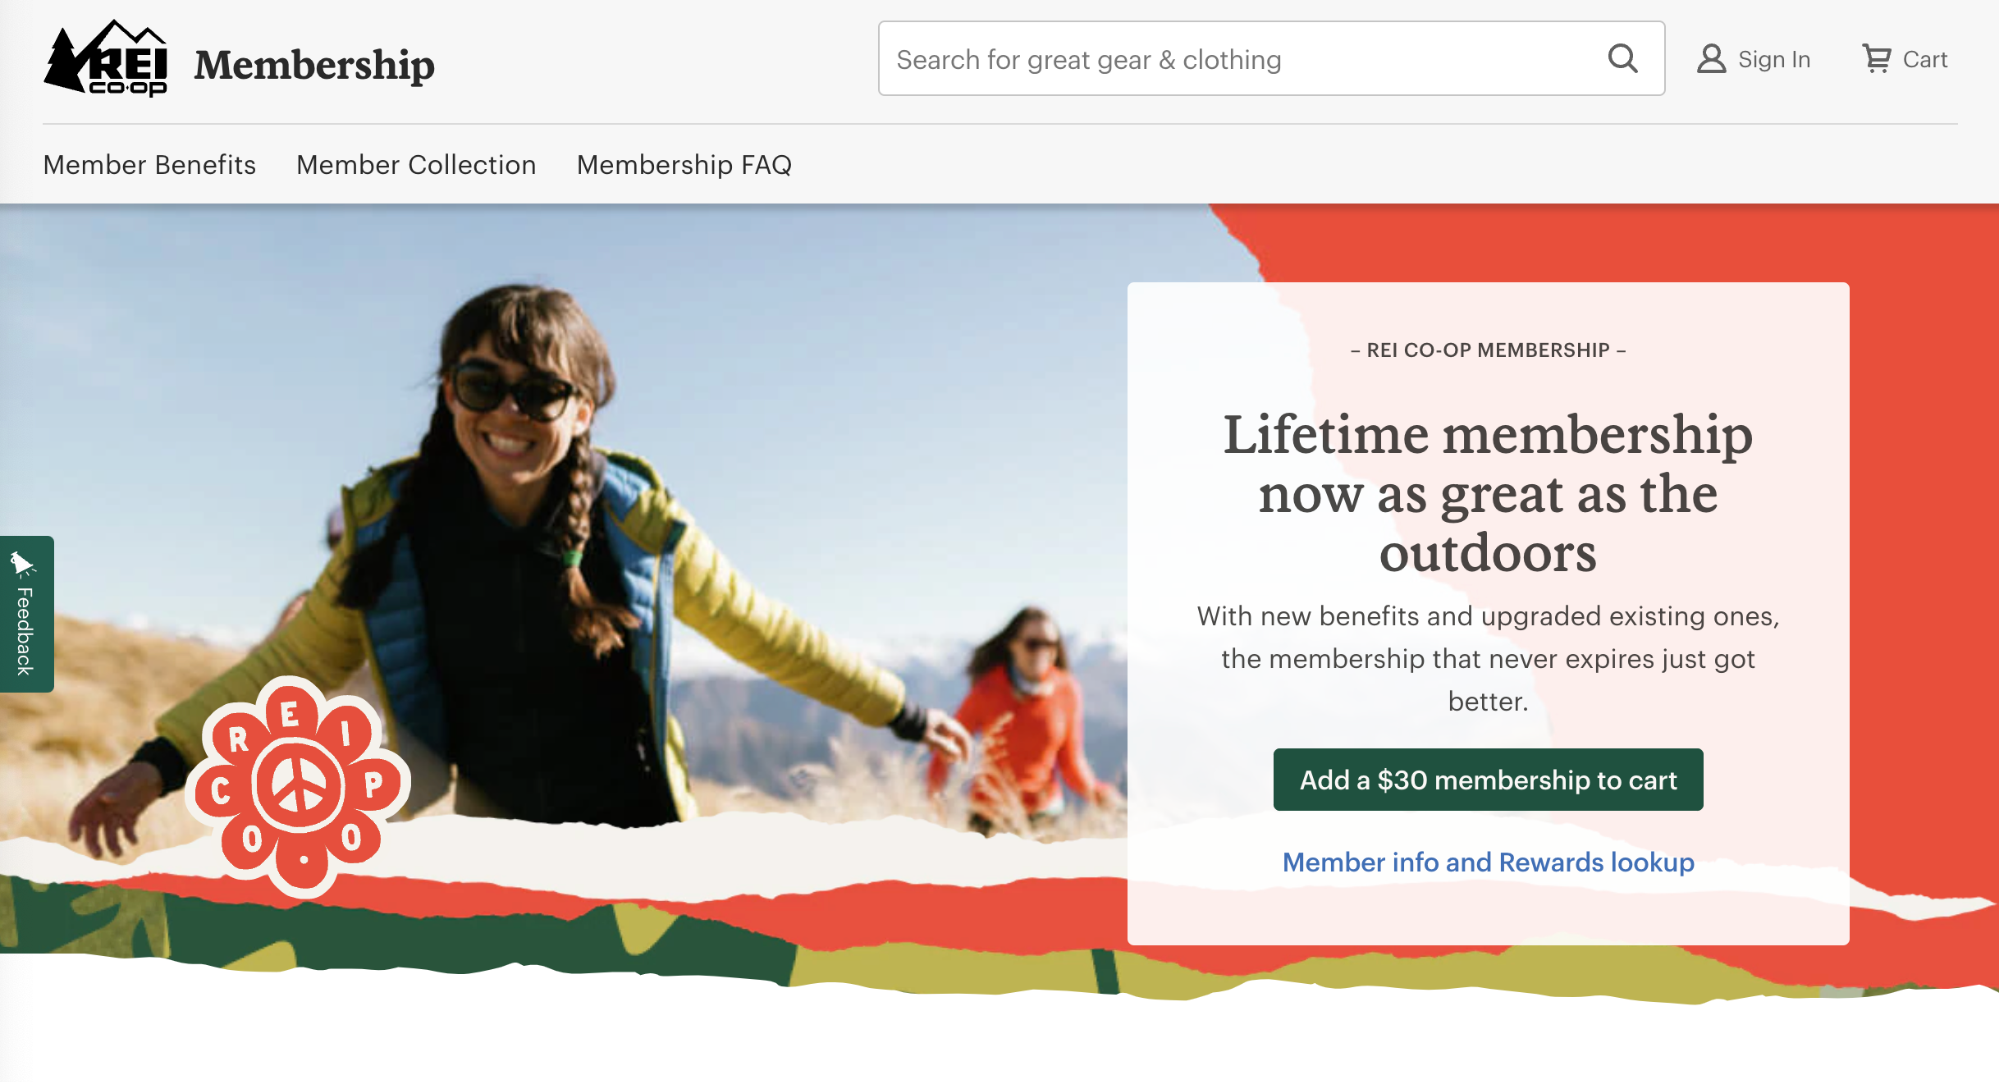 The REI membership landing page with an image of a woman outdoors and a CTA